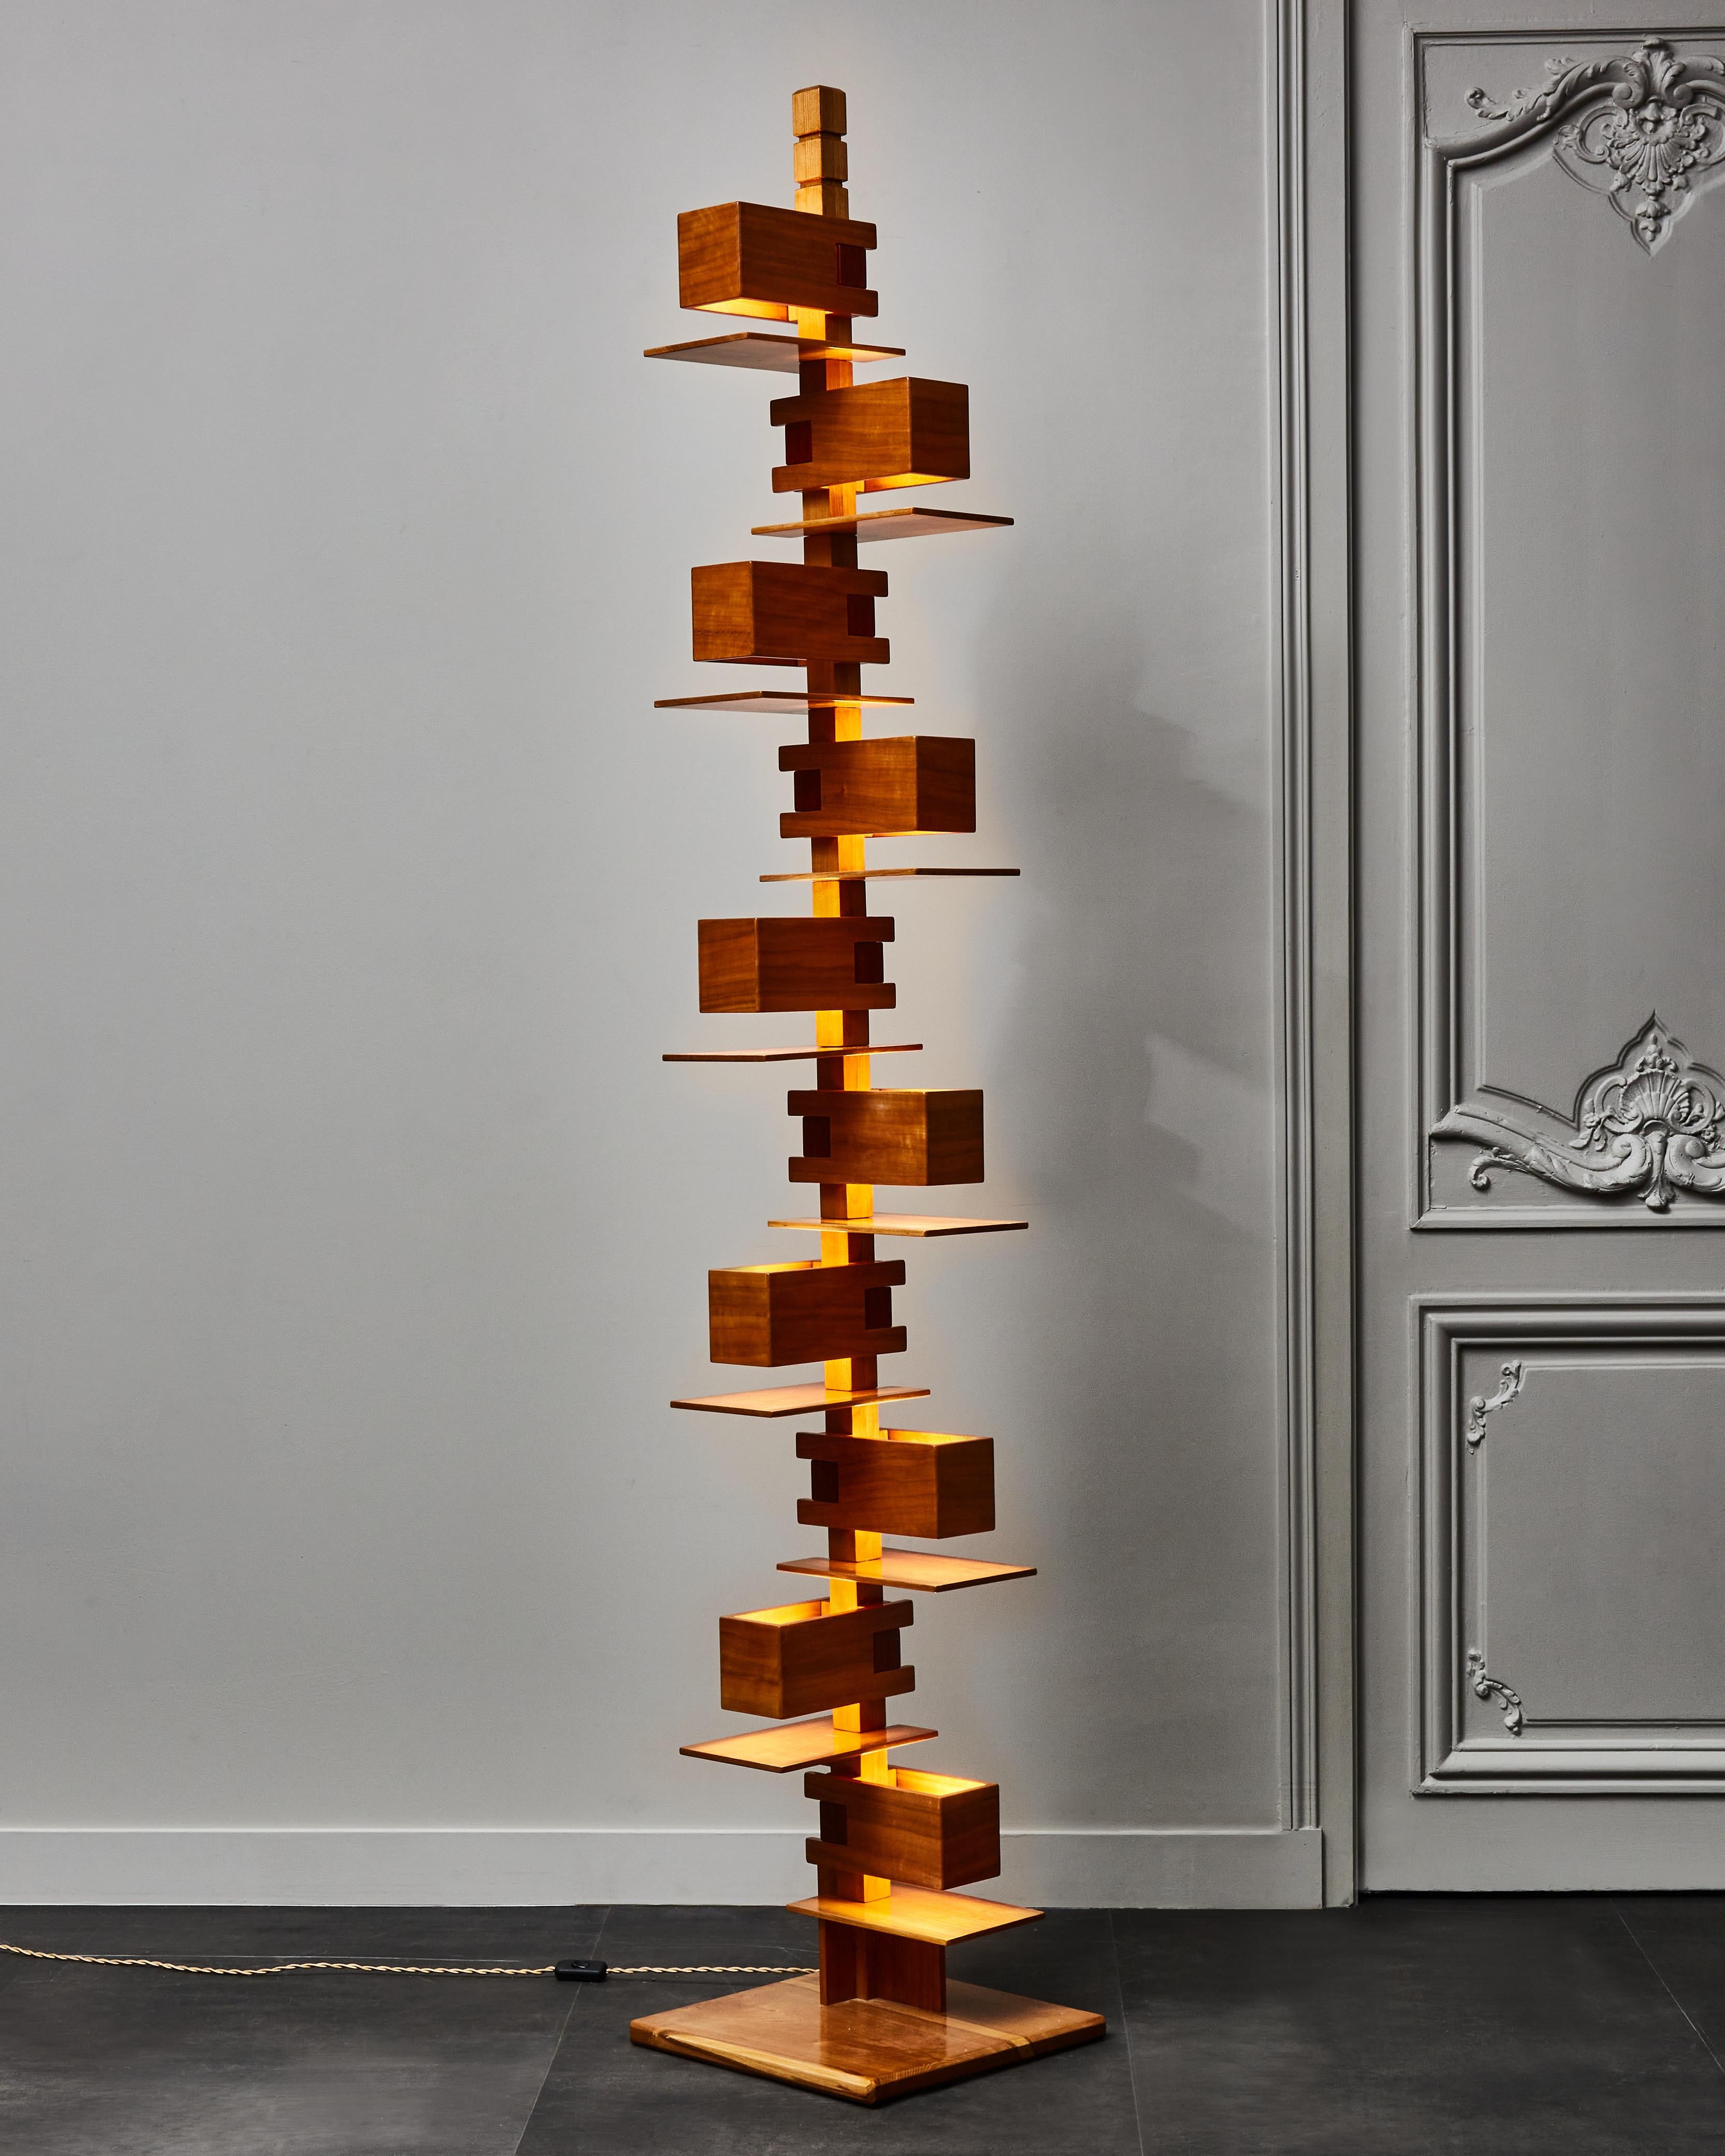 Tall cherrywood floor lamp designed by Franck Lloyd Wright and called Taliesin 2. Made of different shelves with integrated lights, each enlightening the one below.